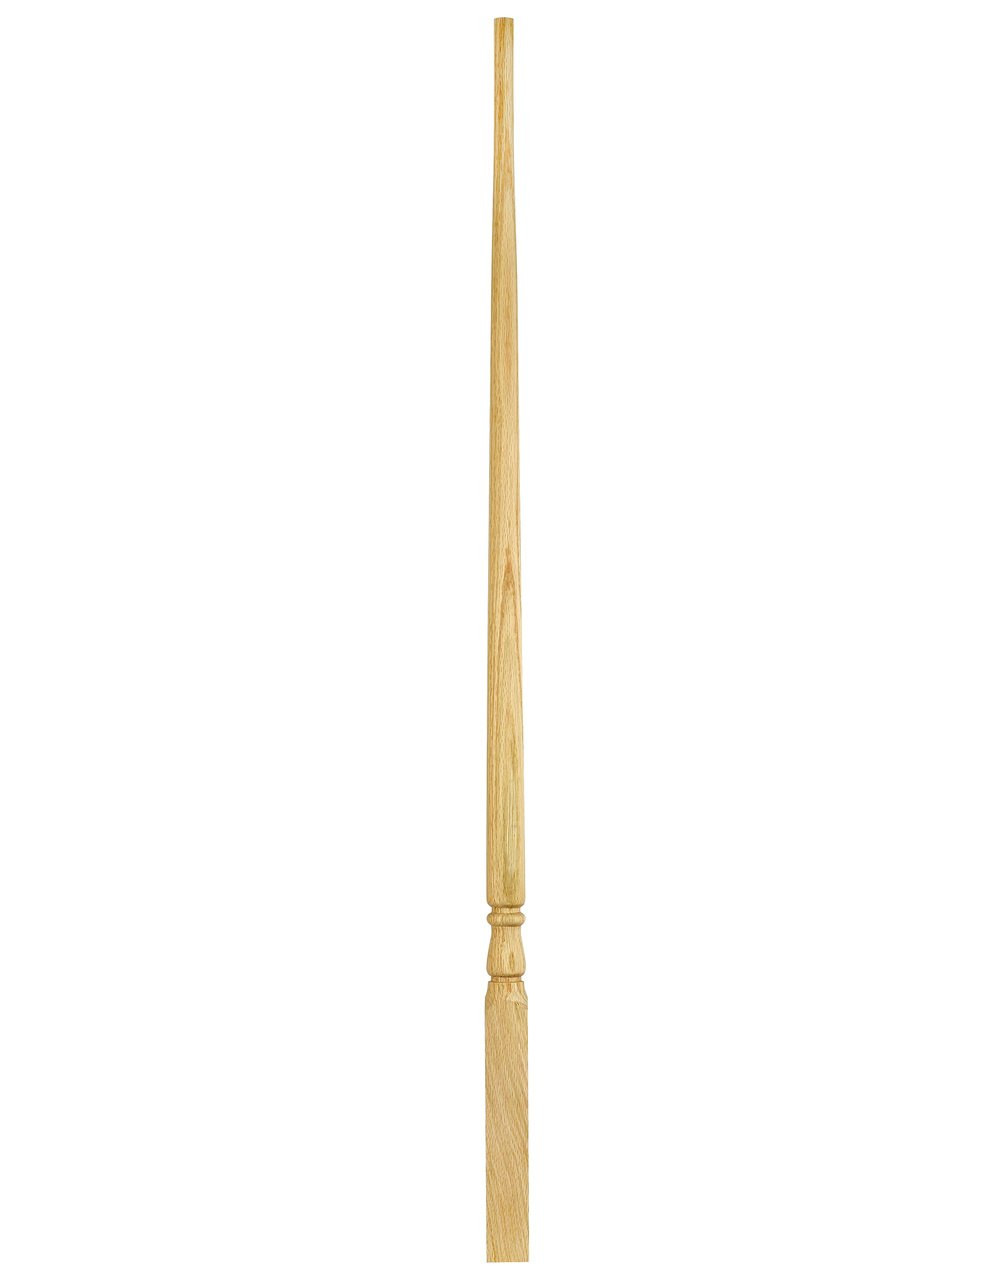 C-5015 36" Colonial Baluster (3)